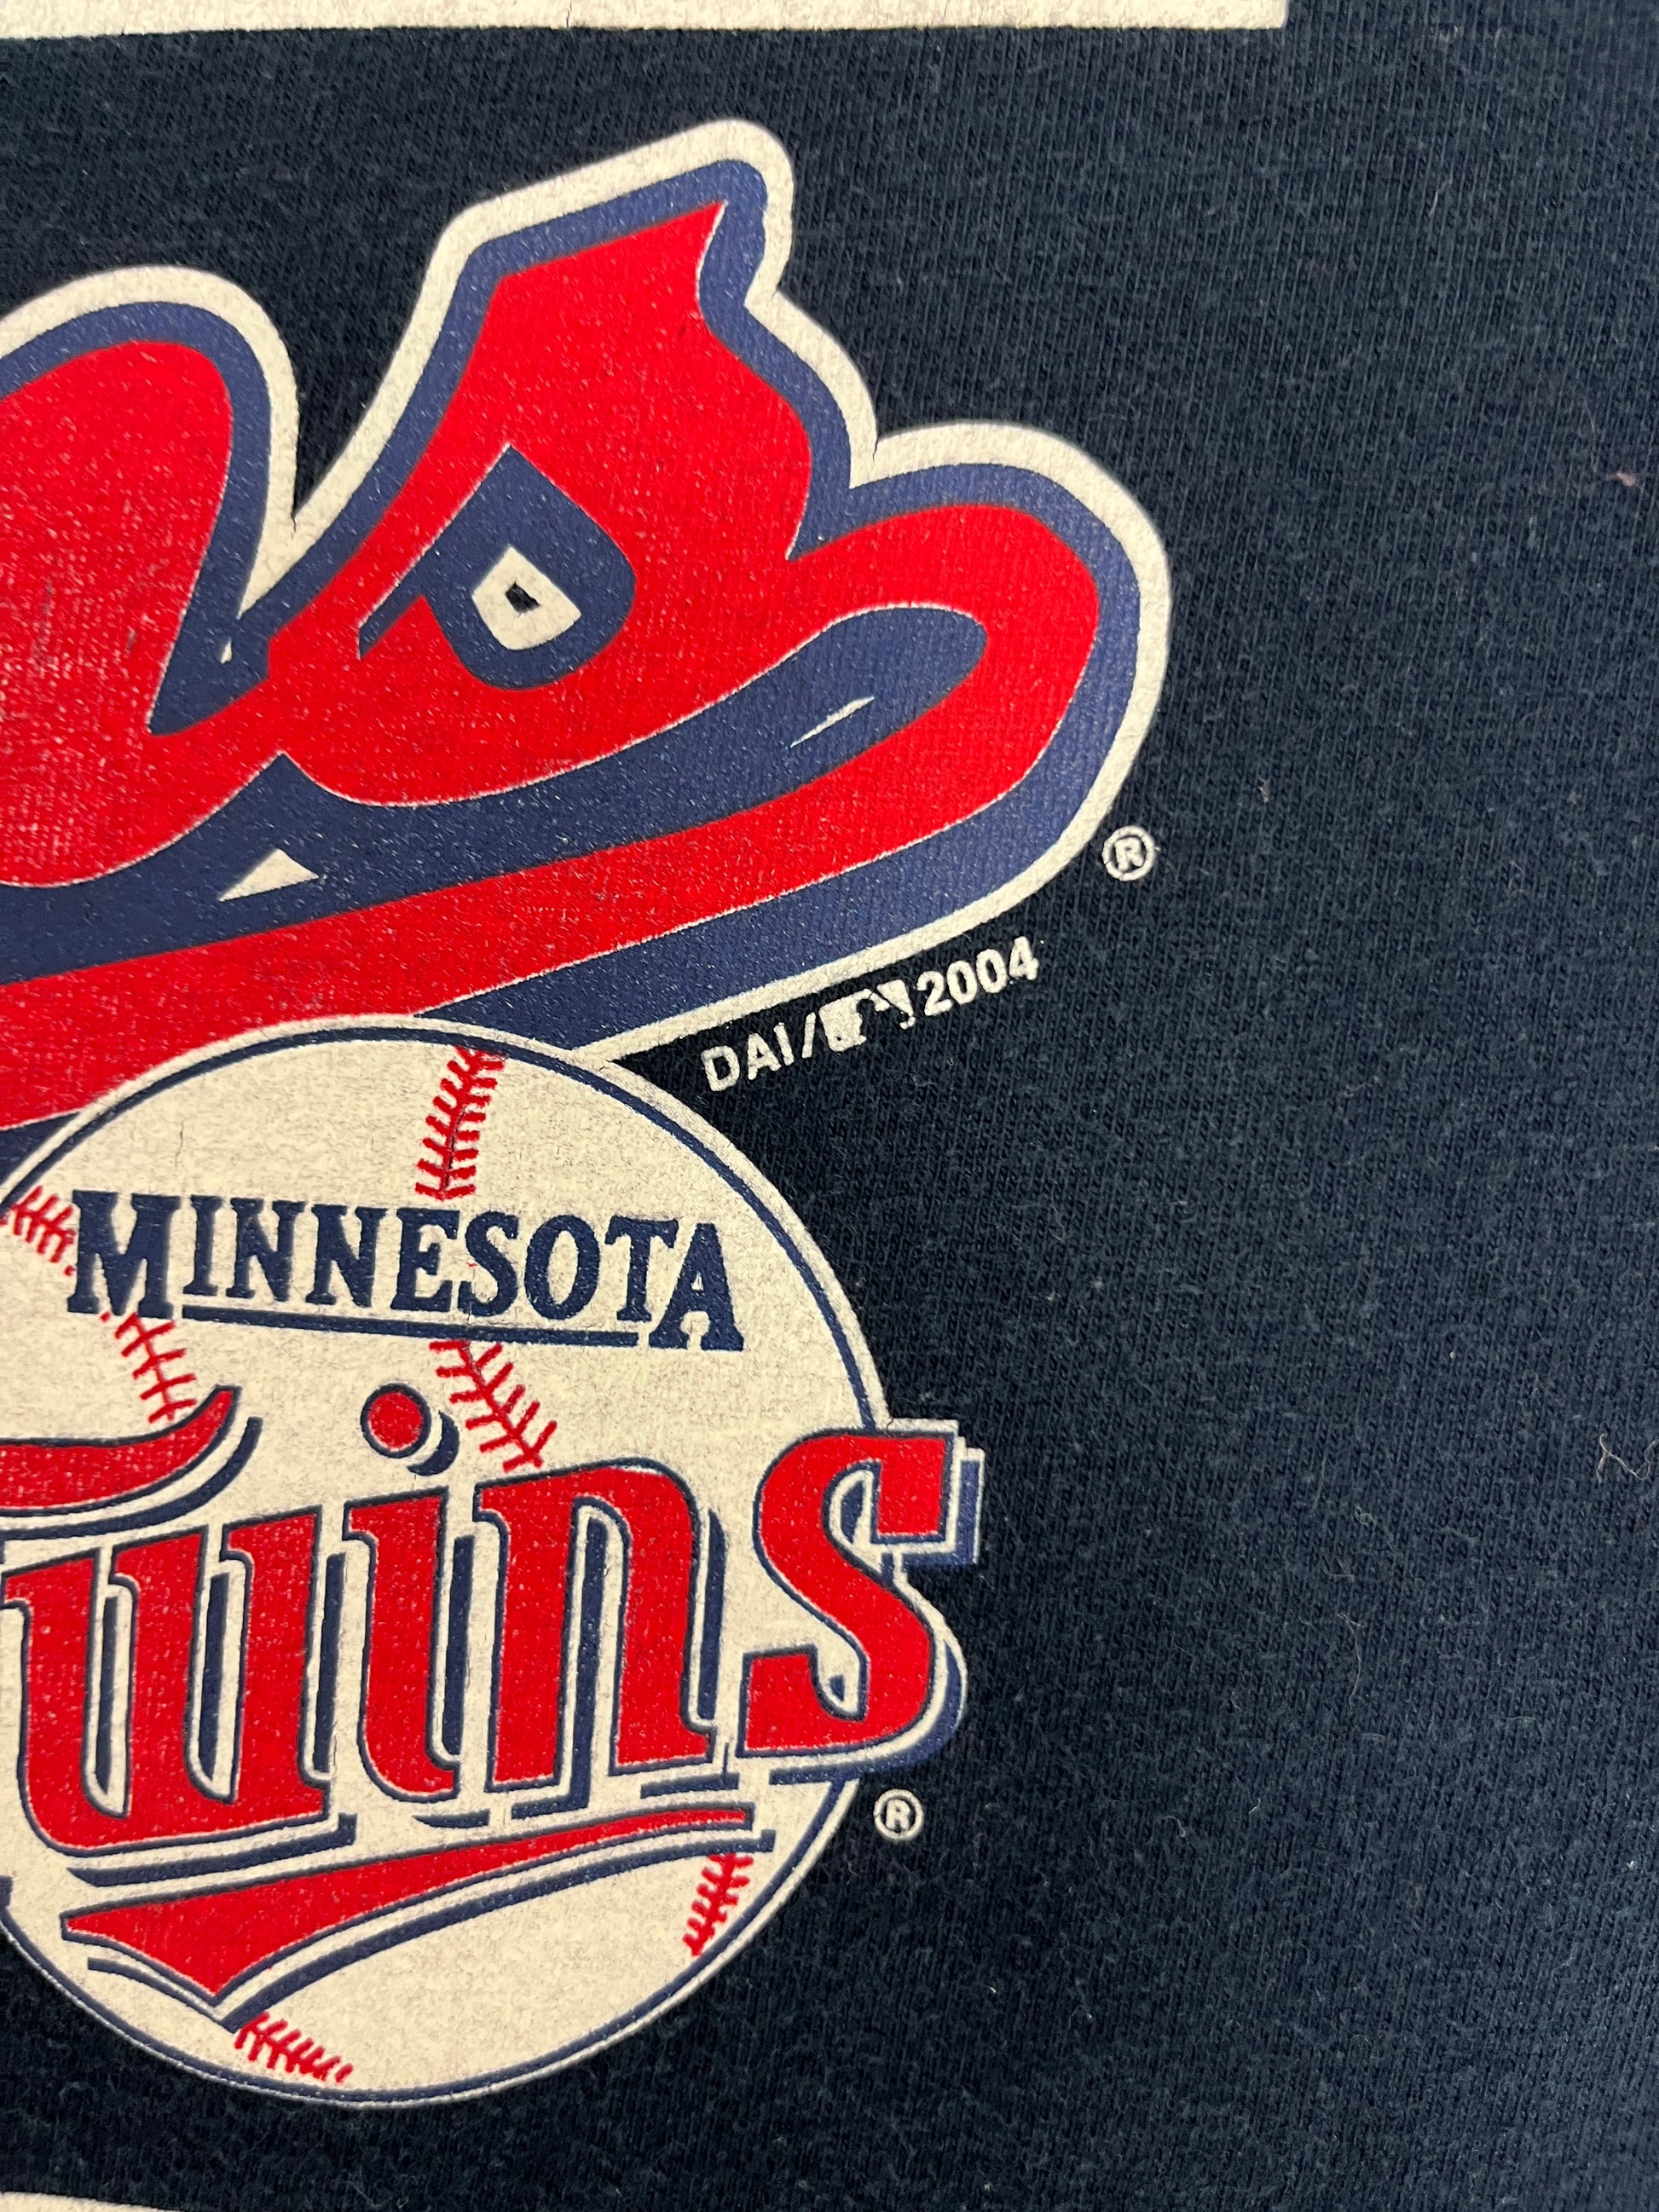 findsnostalgic Vintage 2000s Minnesota Twins Baseball MLB Sportswear Fan Gear Central Division Champs 2002 Navy Blue Graphic T Shirt Large Mens *M3